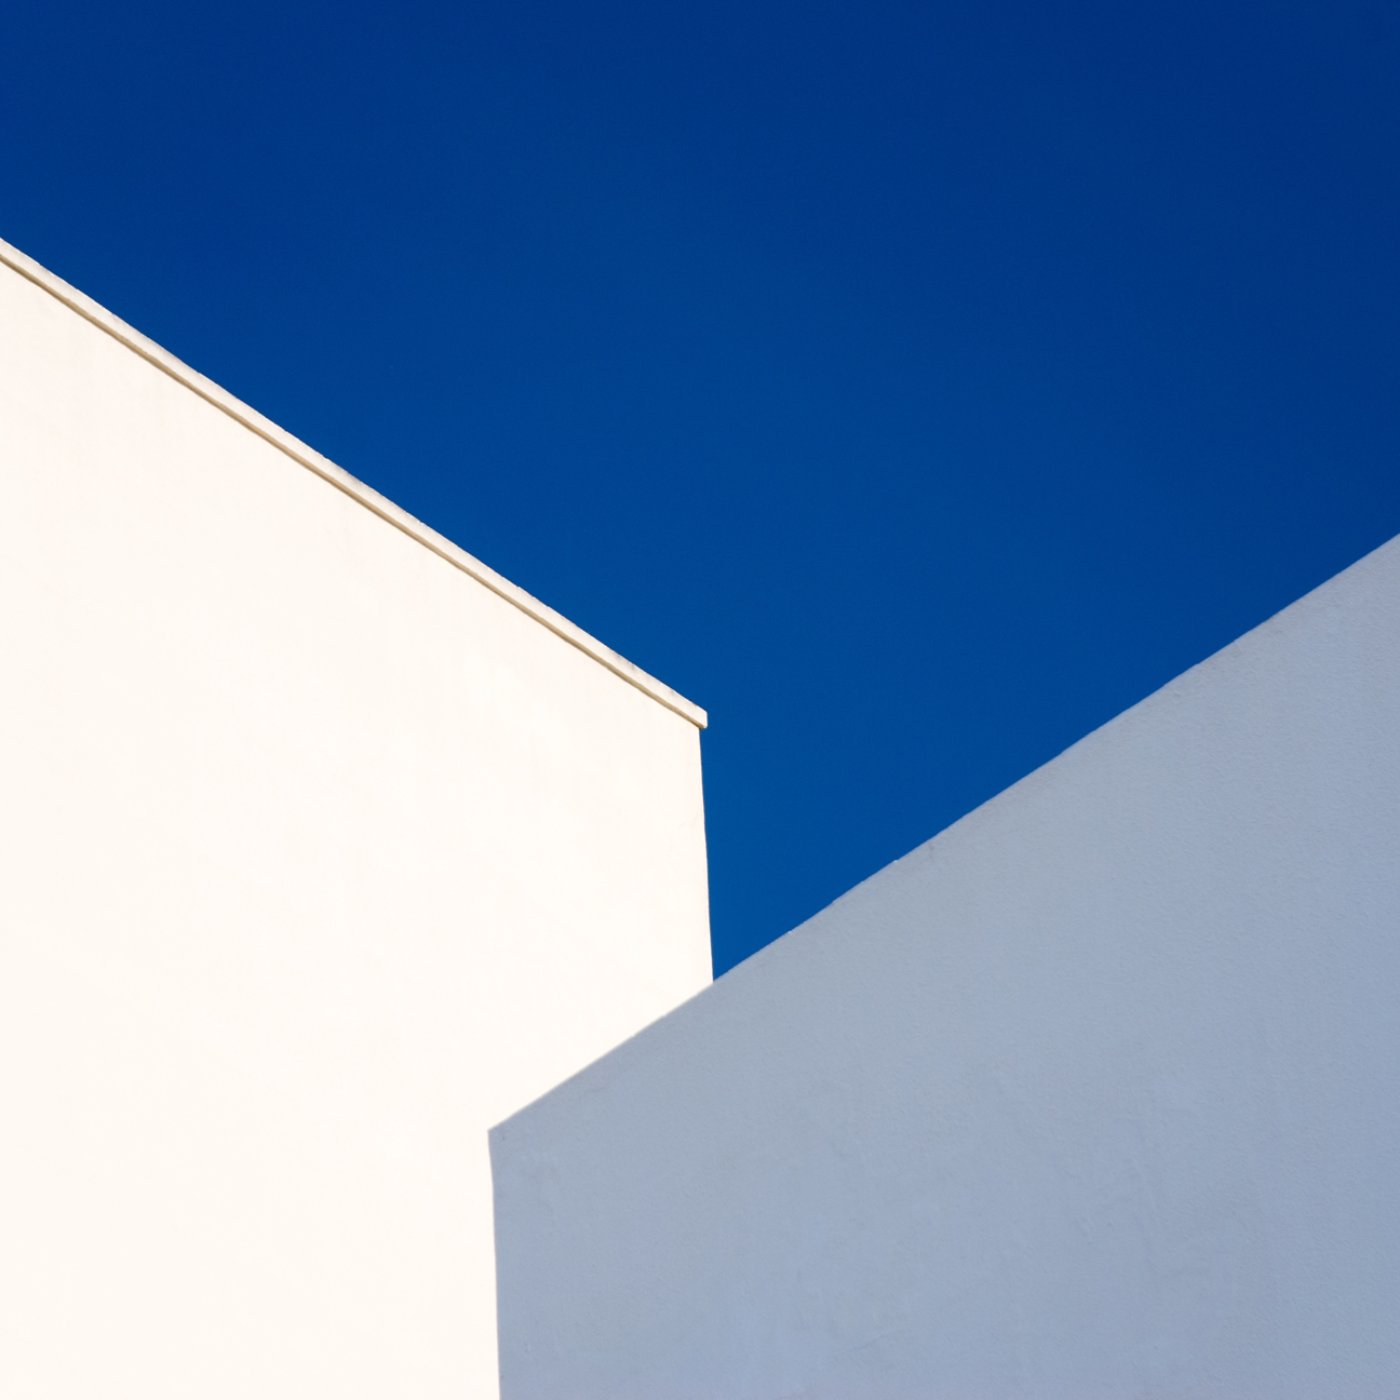 Walls of a white and pale blue buildings against a vibrant blue sky, Cadiz, Andalucia, Spain, Europe.